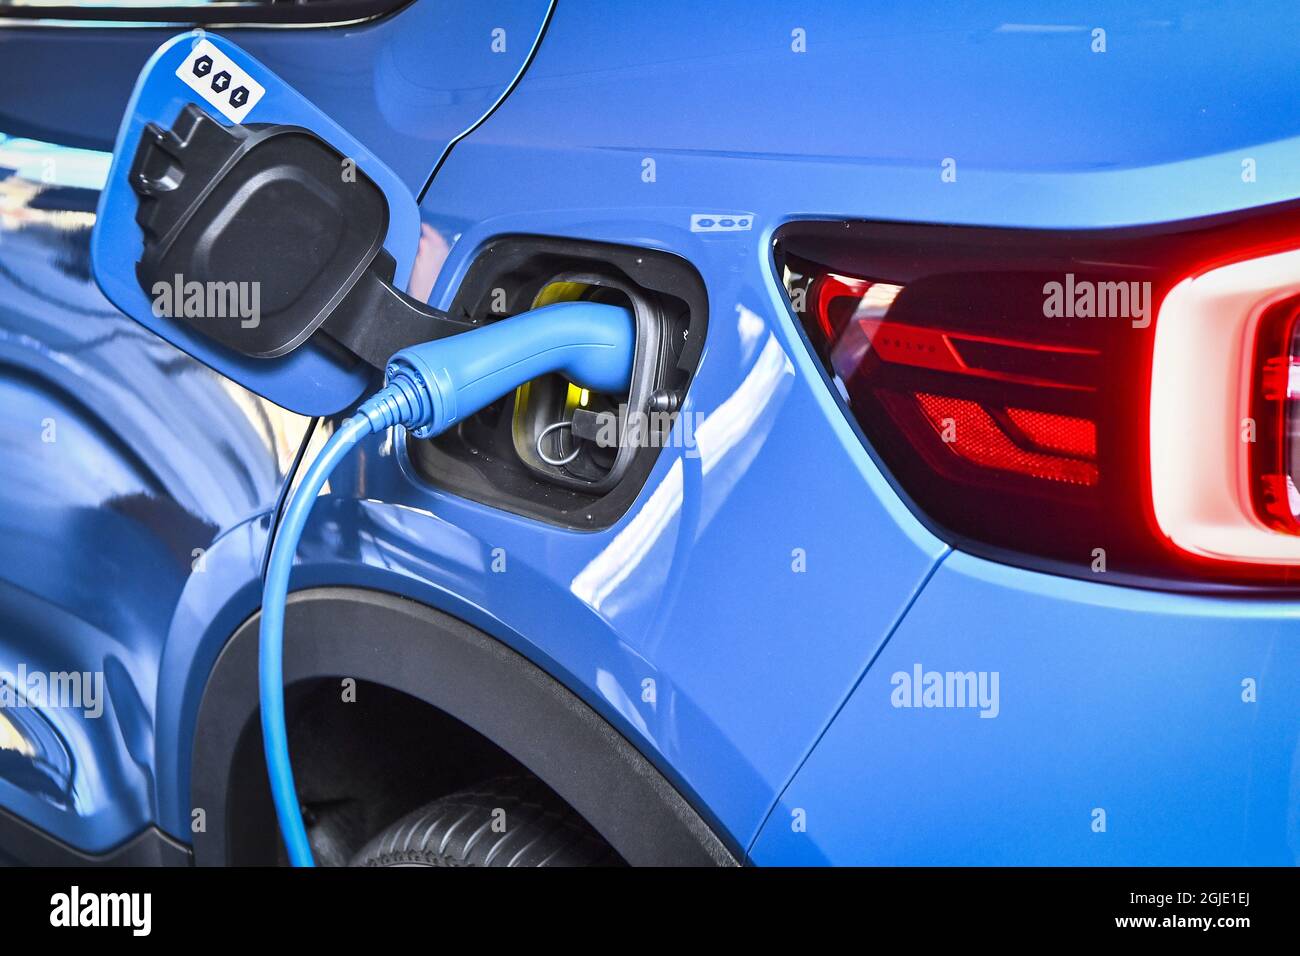 Volvo Cars reveals their new electric car Volvo C40 Recharge in Stockholm, Sweden, on March 02, 2021. Photo: Claudio Breciani / TT / code 10090  Stock Photo